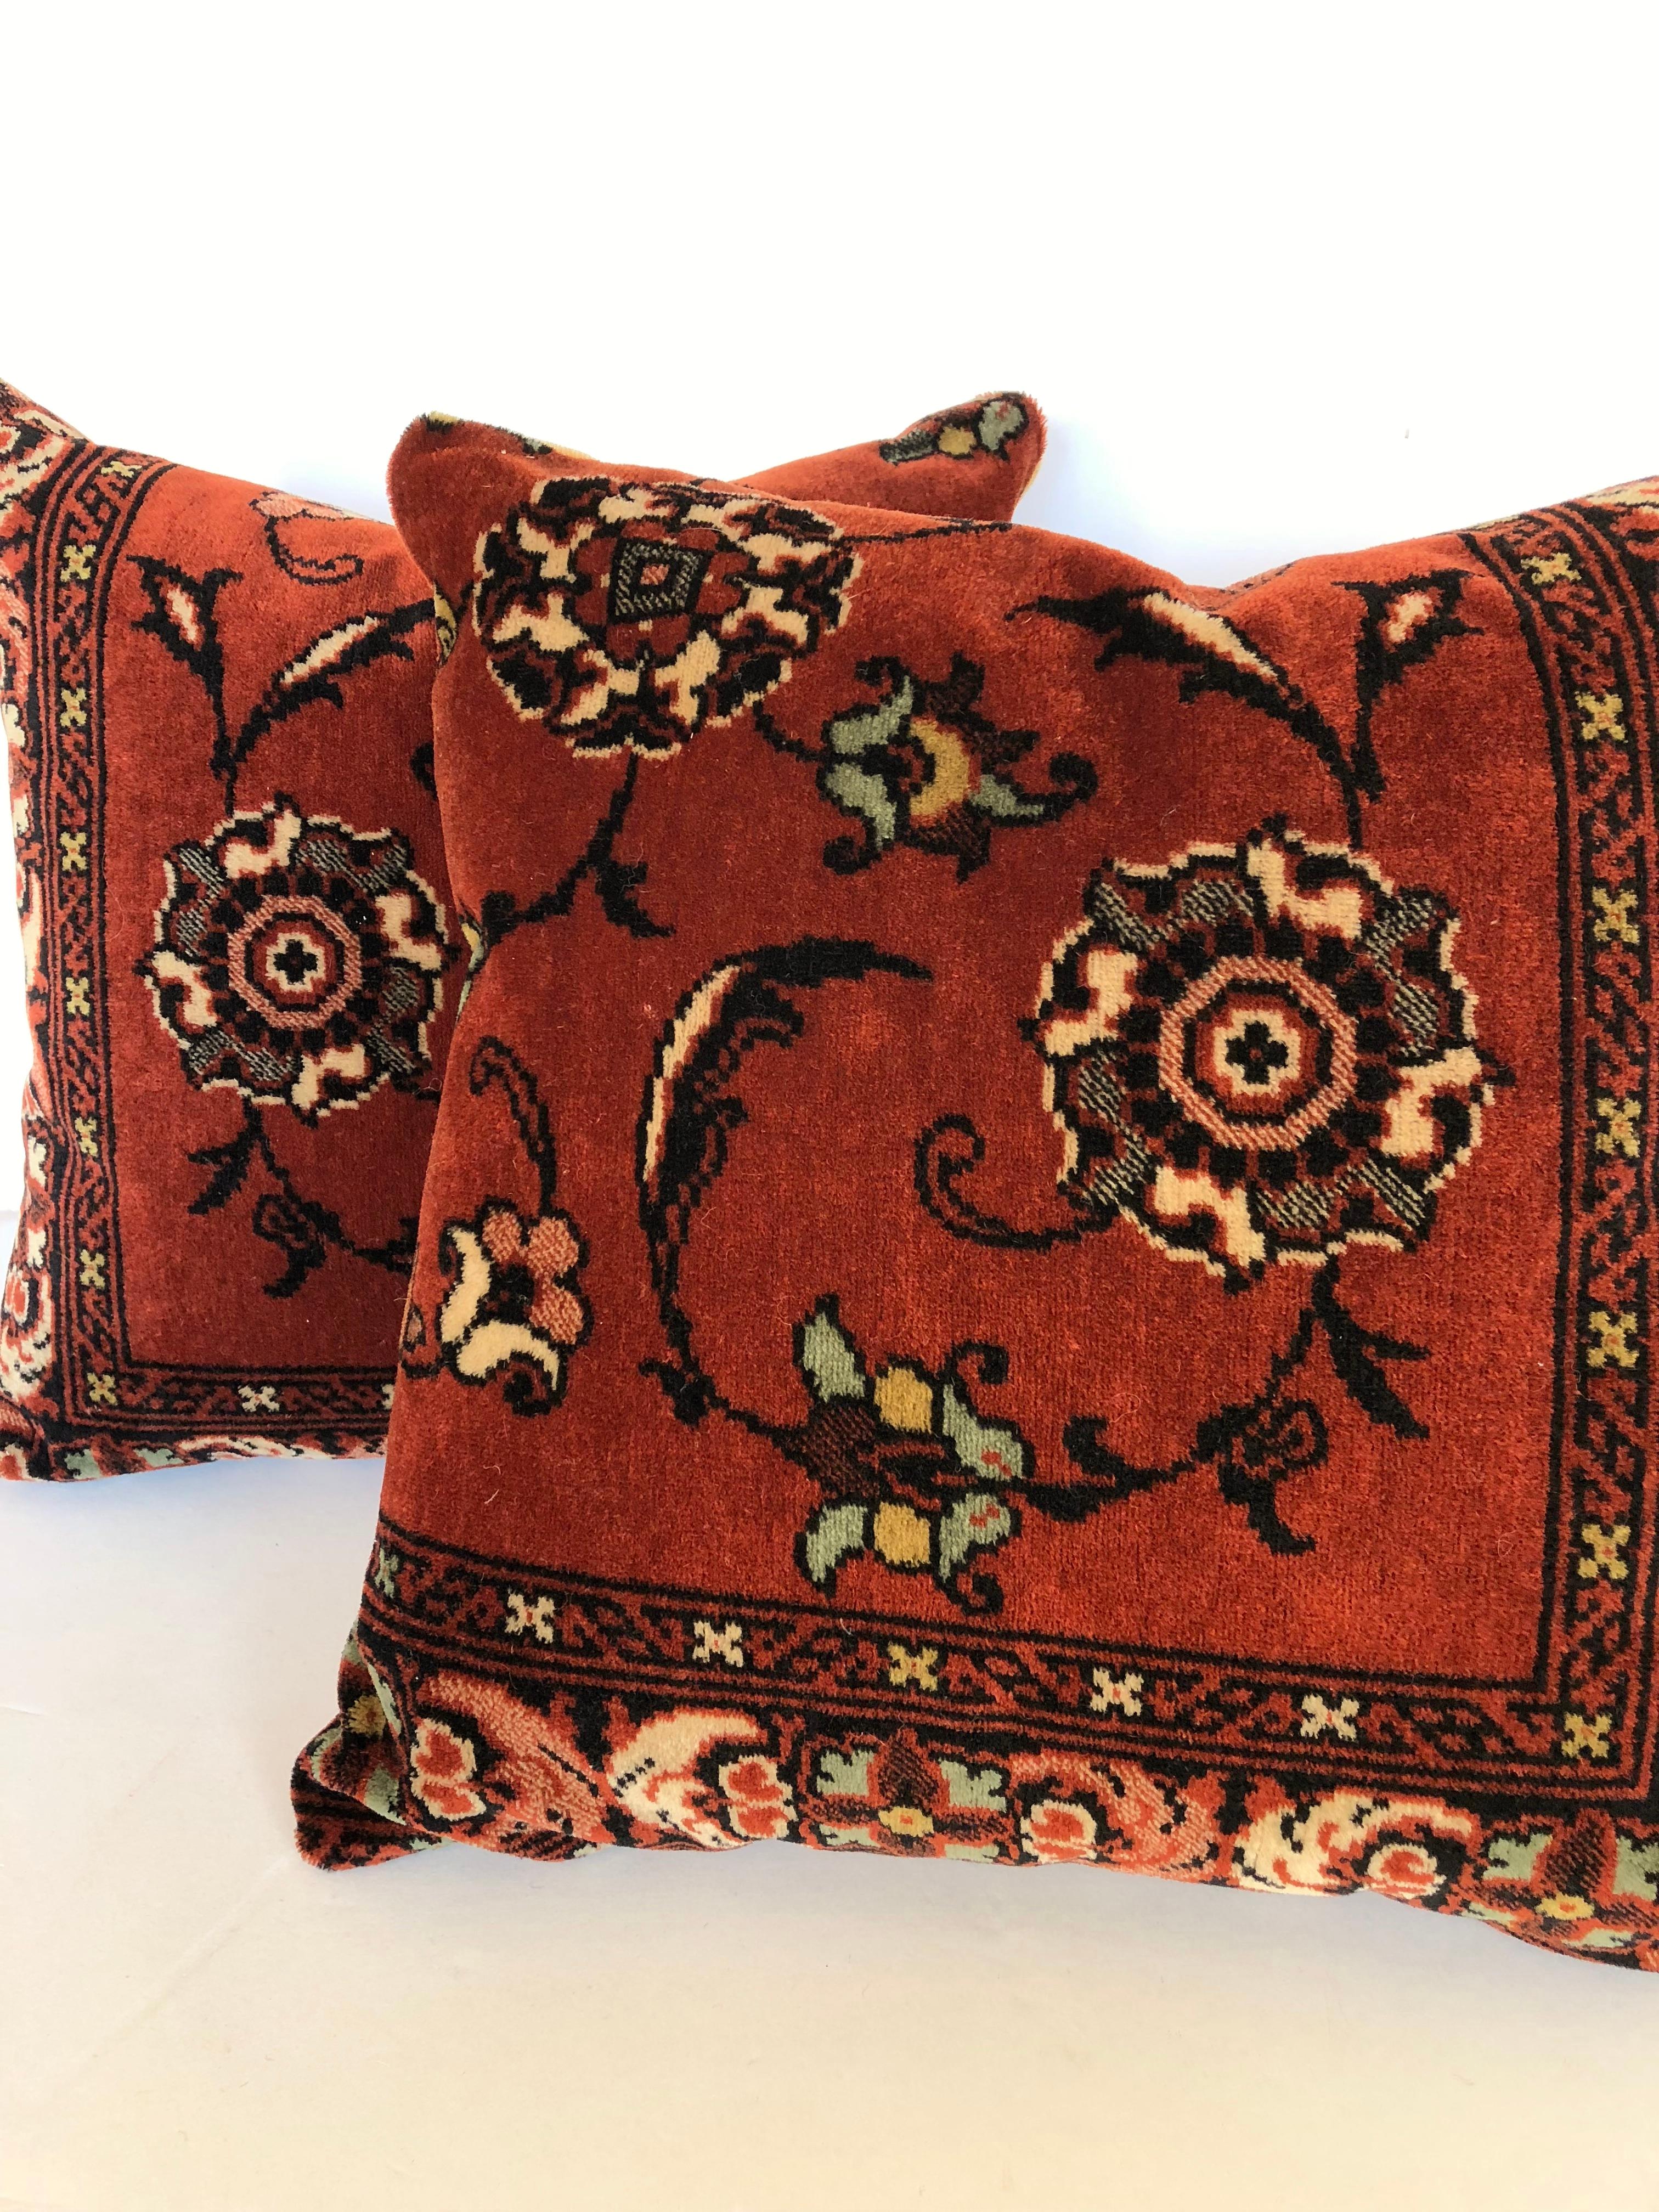 Custom Pillows by Maison Suzanne, Cut from a Vintage Mohair Textile, Netherlands For Sale 1